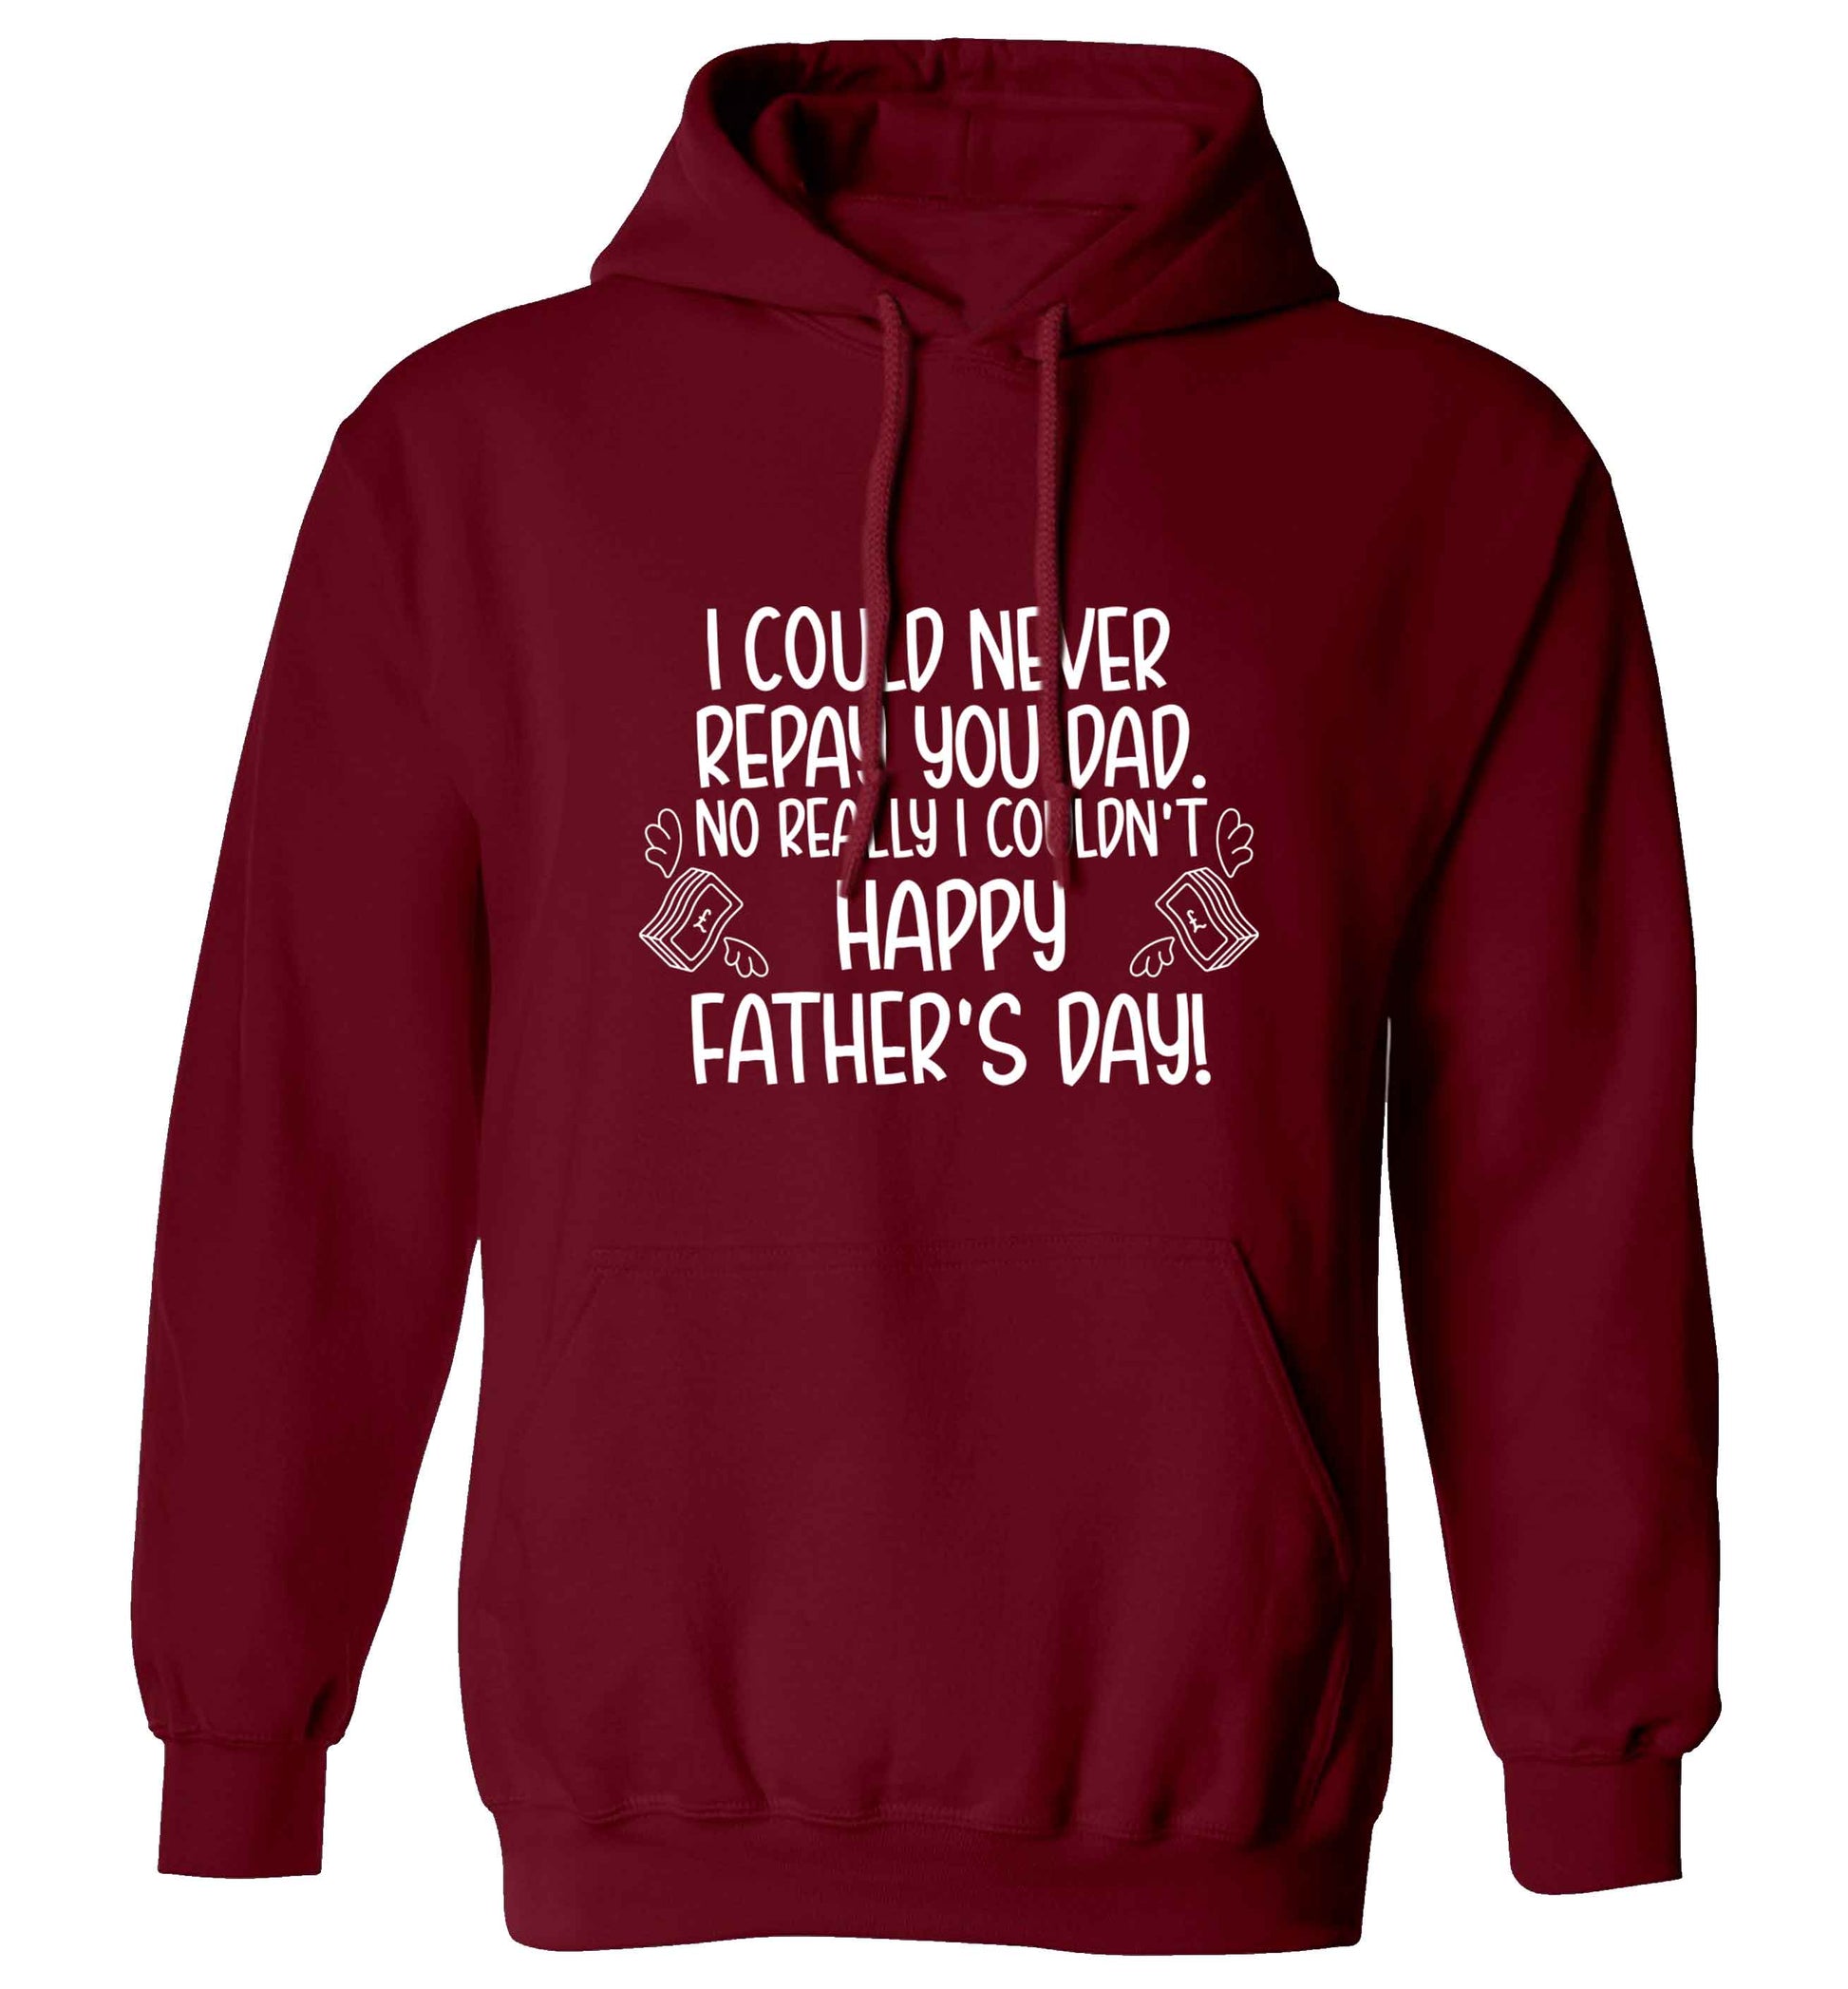 I could never repay you dad. No I really couldn't happy Father's day! adults unisex maroon hoodie 2XL